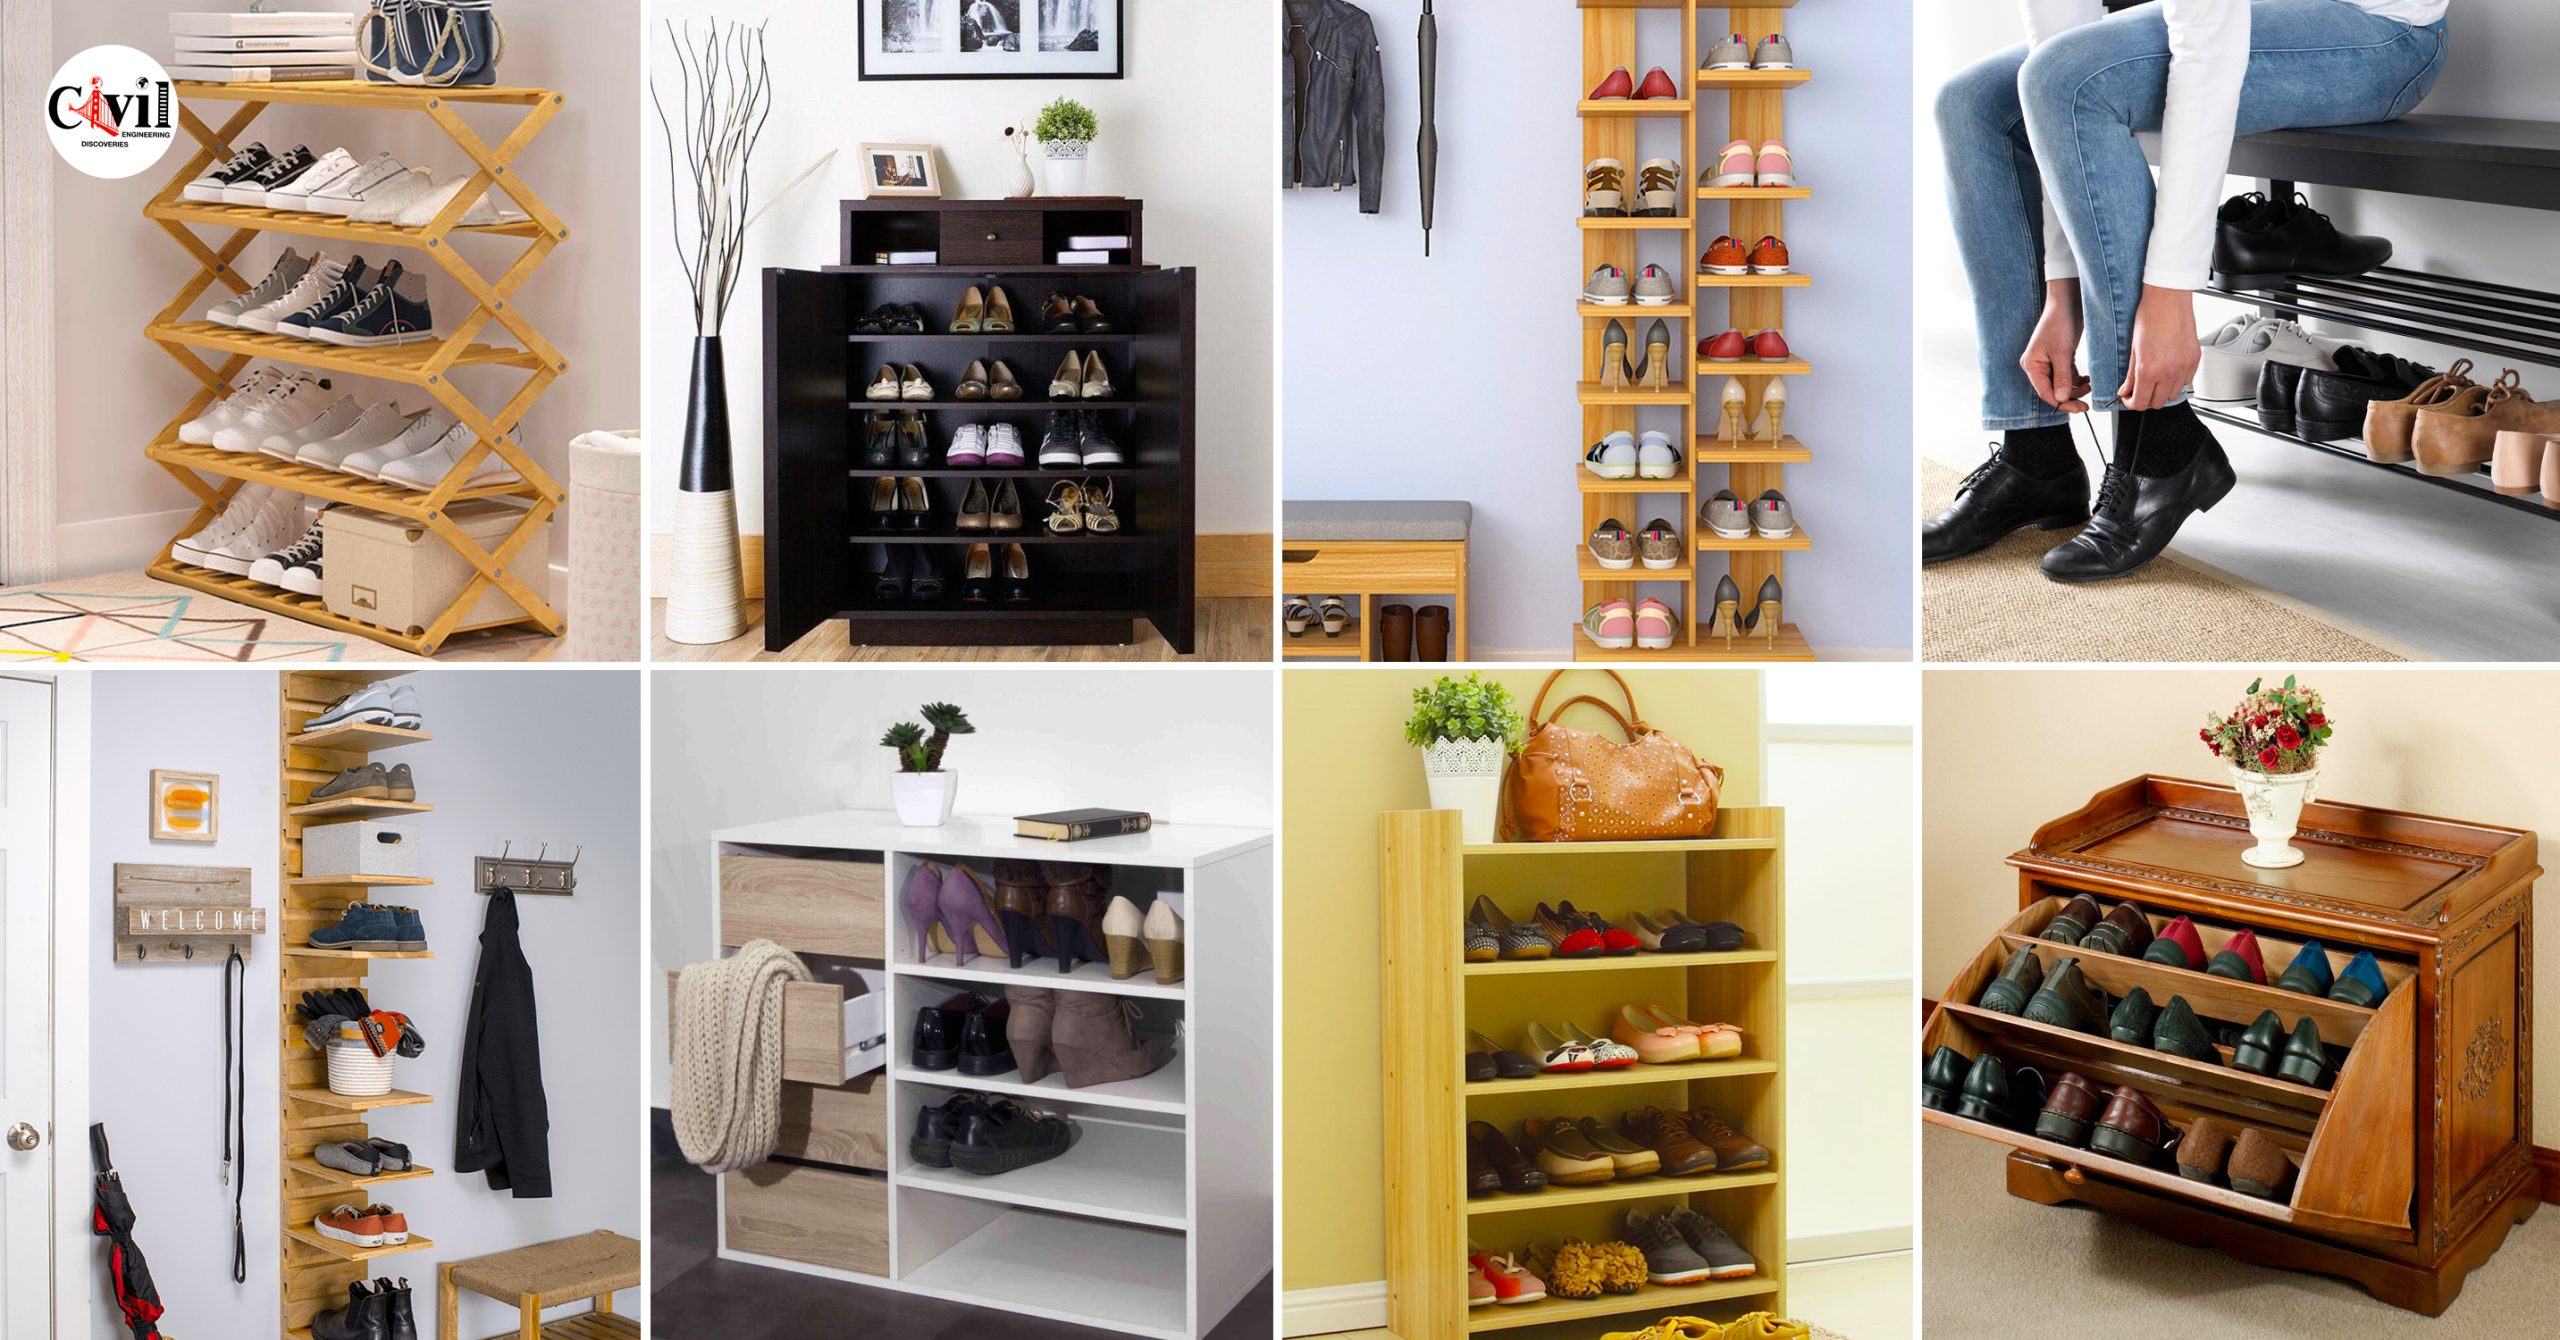 https://engineeringdiscoveries.com/wp-content/uploads/2023/12/Clever-Shoe-Storage-Ideas-Youll-Actually-Want-to-Try-in-Your-Home-scaled.jpg